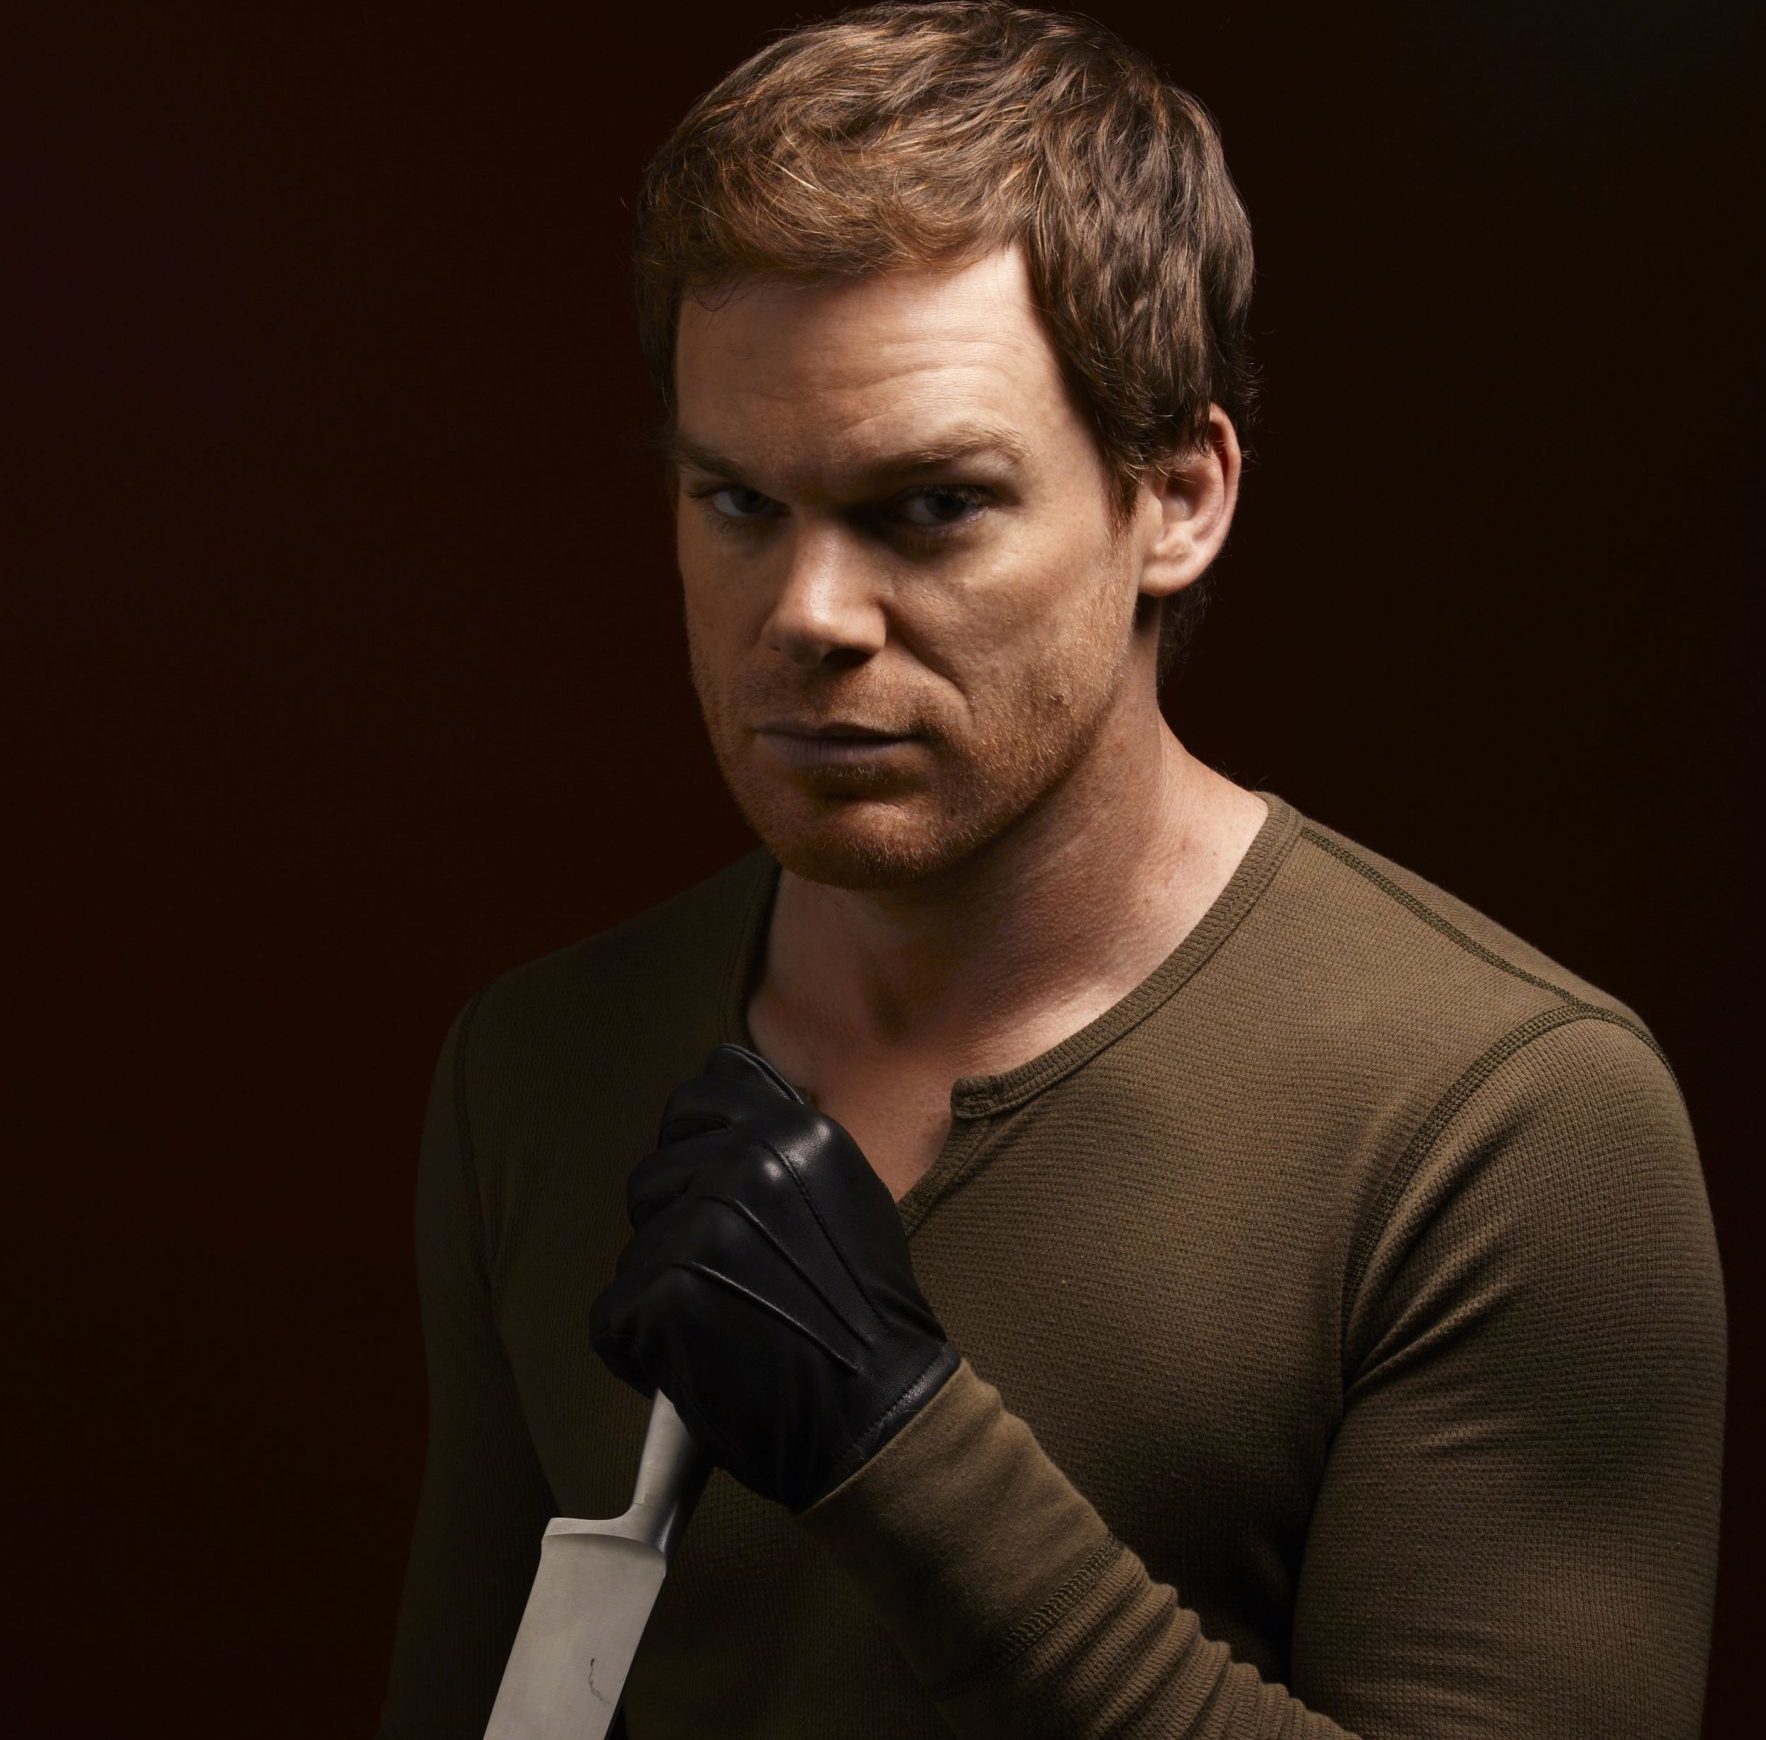 Dexter: Showrunner Clyde Phillips Says The Return Won’t Be Season 9, But A Second Chance At A Finale